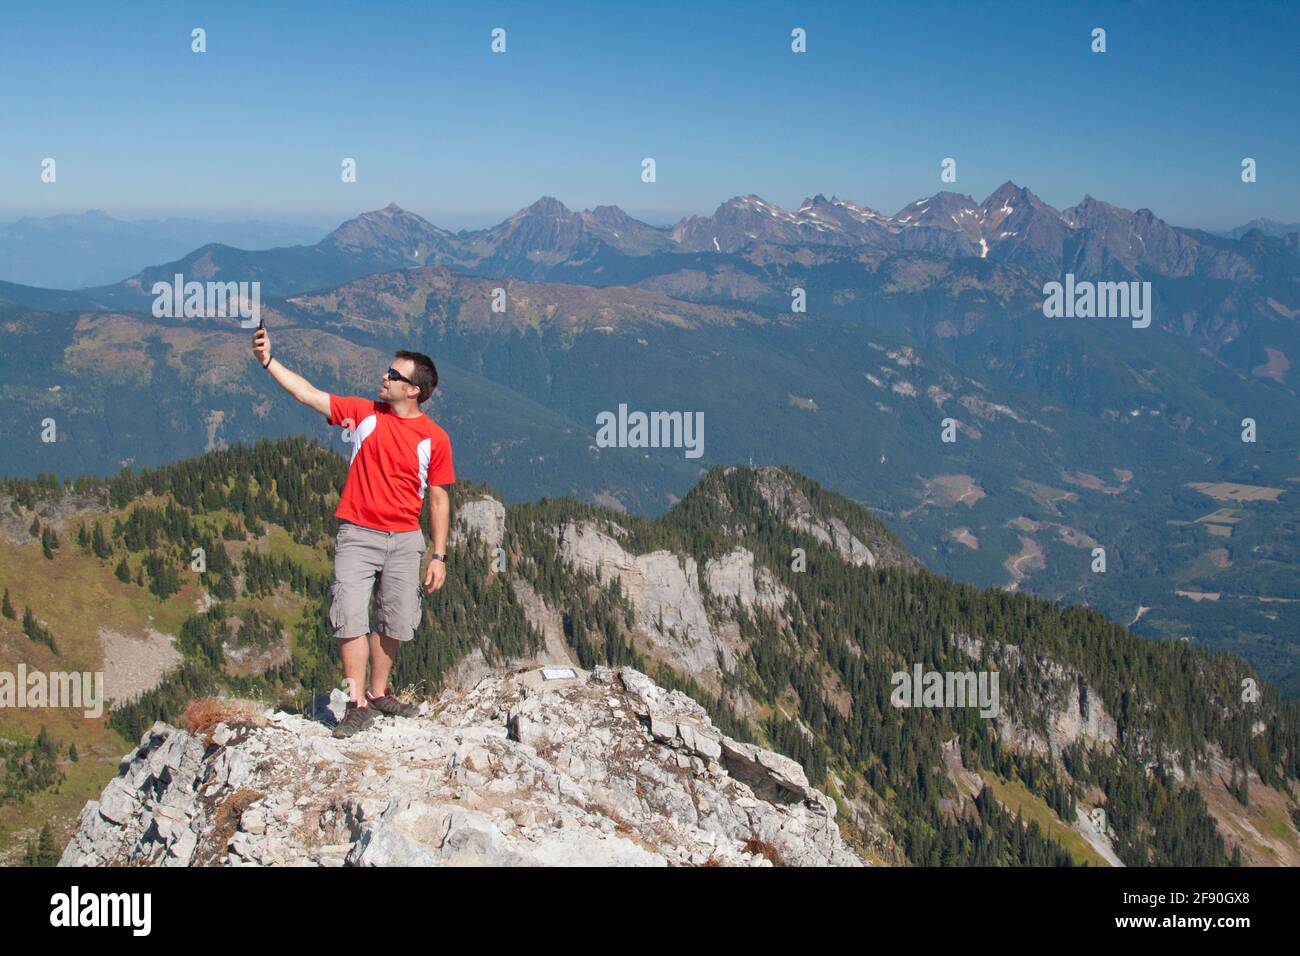 Man looks for phone connection while hiking in the mountains. Stock Photo